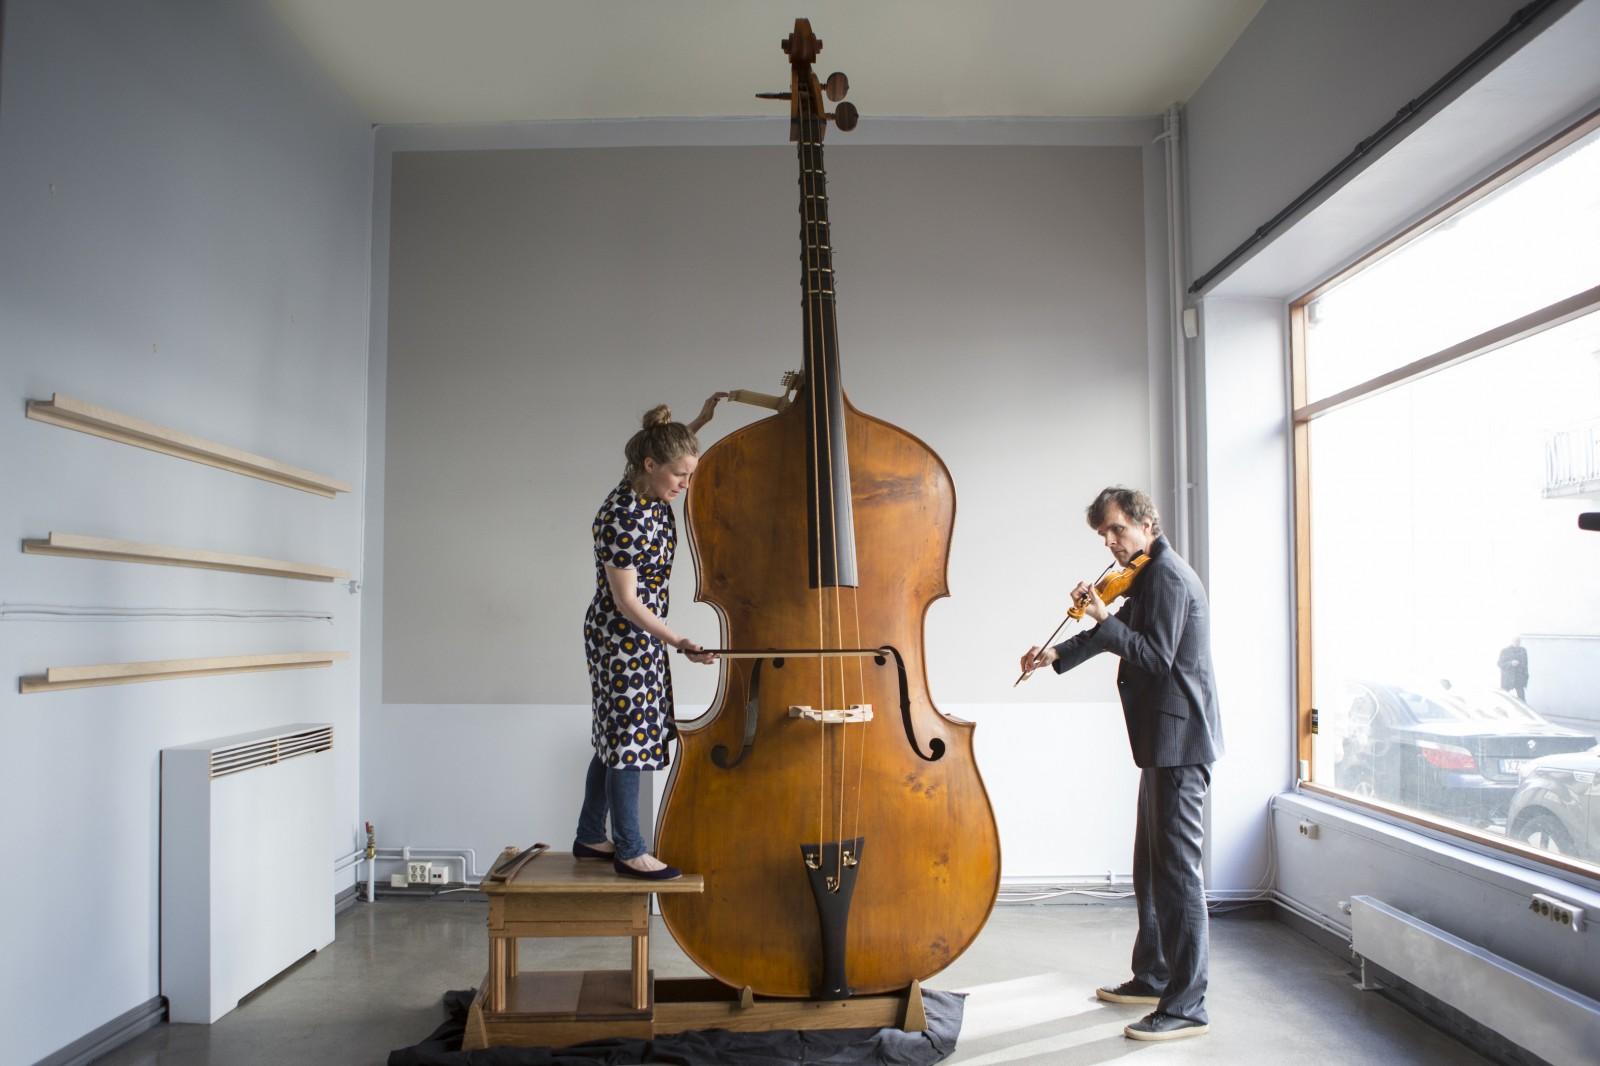 The octobass is an extremely large bowed string instrument that was